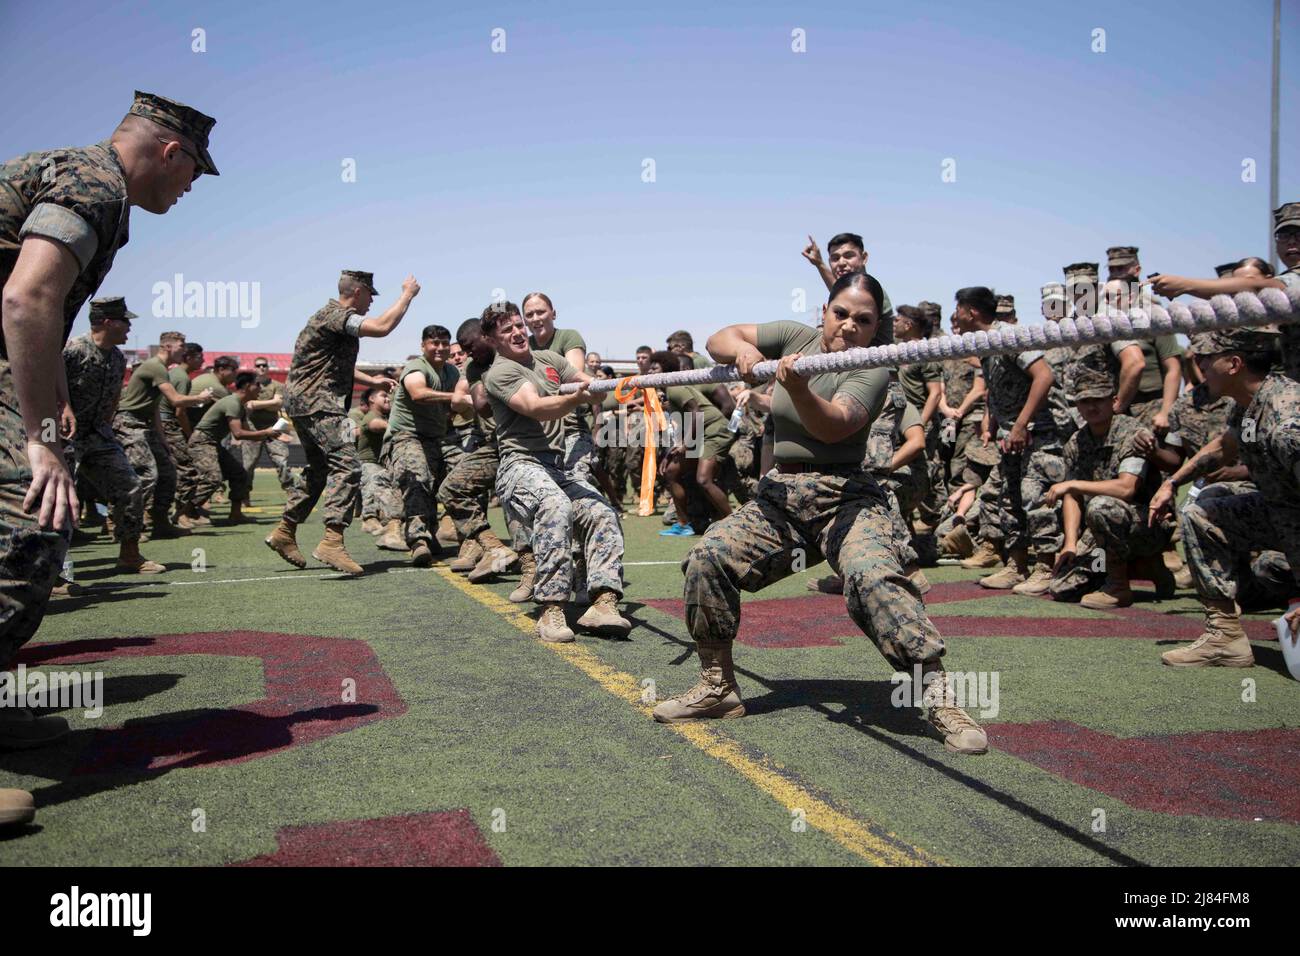 Yuma, Arizona, USA. 29th Apr, 2022. U.S. Marines from Marine Wing Support Squadron (MWSS) 371 participate in a tug-of-war challenge during the annual Super Squadron competition at Marine Corps Air Station Yuma, Arizona, April 29, 2022. The purpose of this event was to give Marines and Sailors an opportunity to compete in friendly competition and improve unit morale. Credit: U.S. Marines/ZUMA Press Wire Service/ZUMAPRESS.com/Alamy Live News Stock Photo